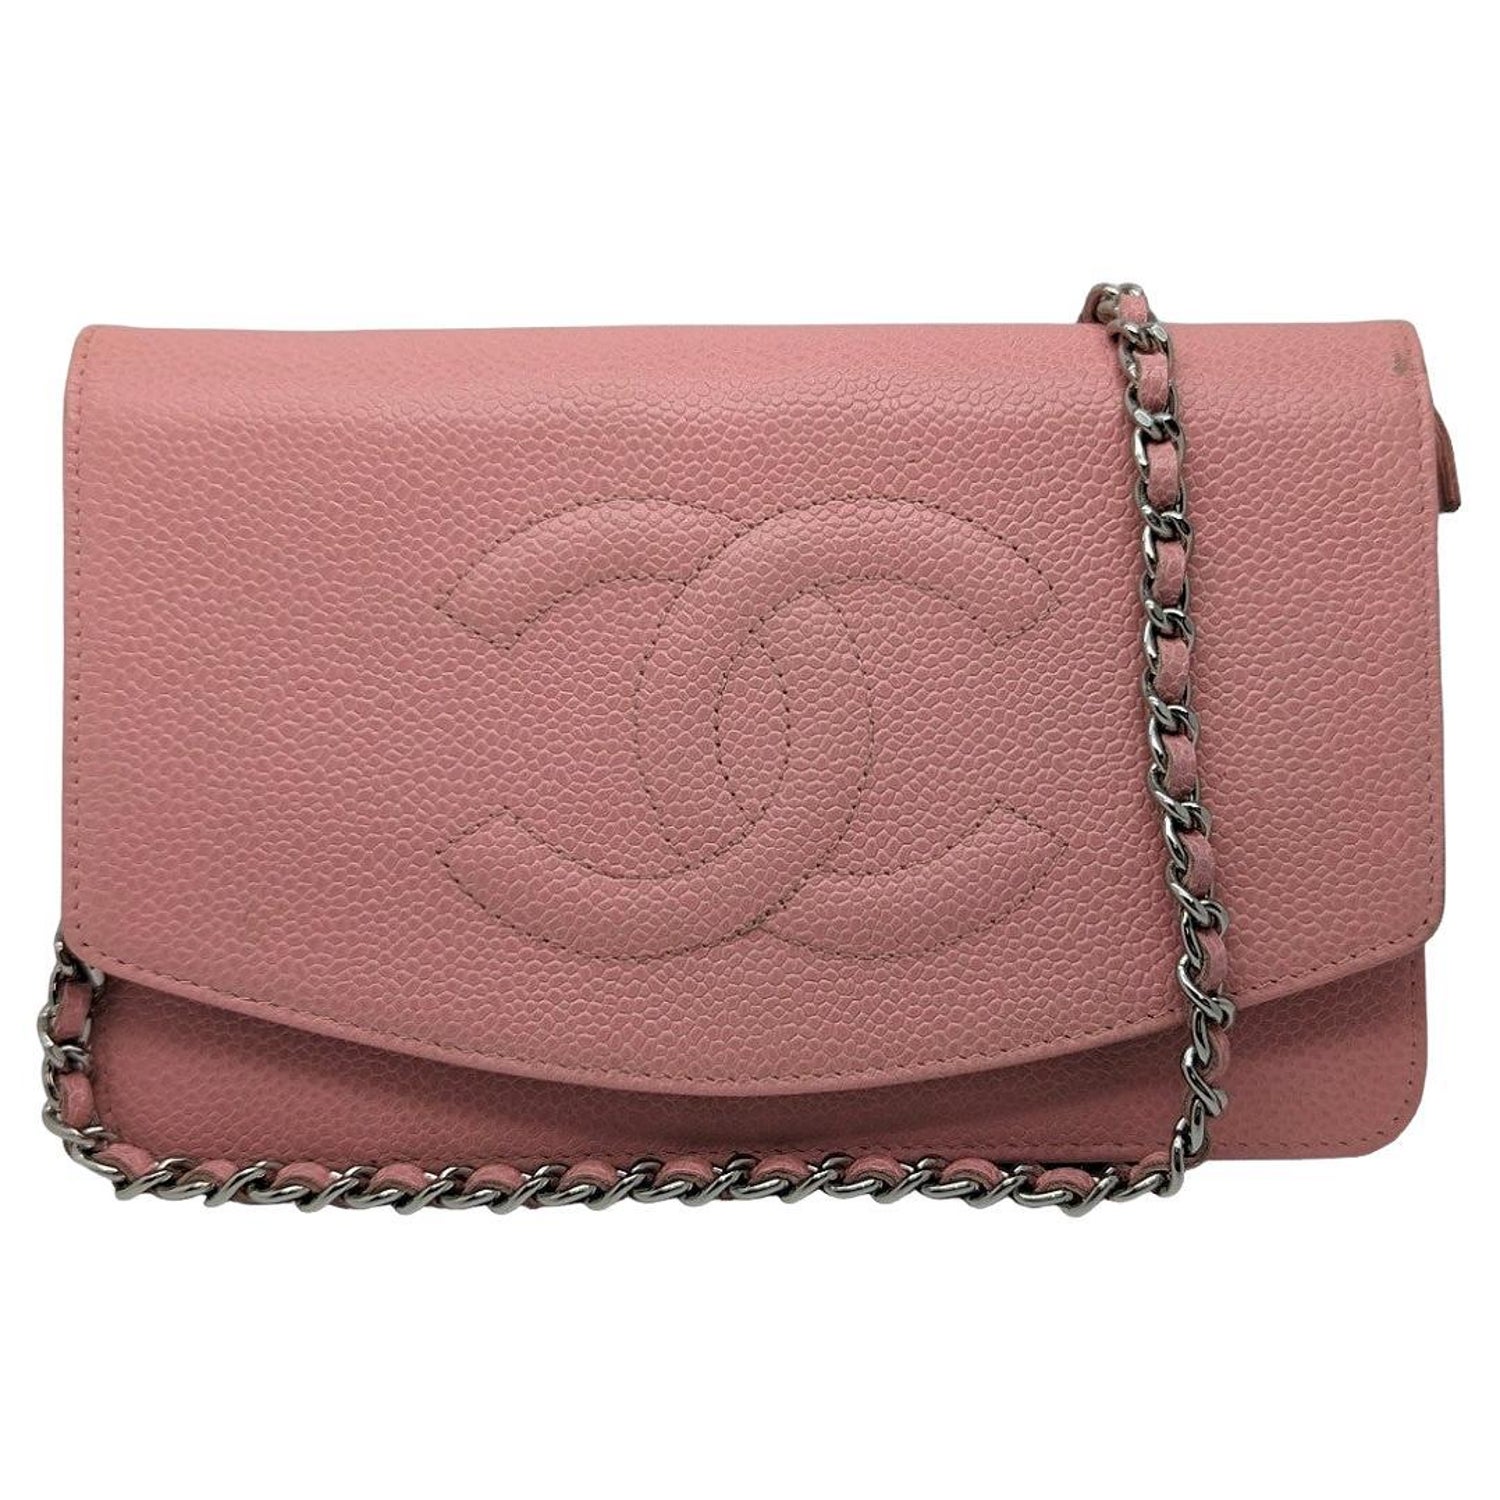 Chanel Timeless Woc - 5 For Sale on 1stDibs